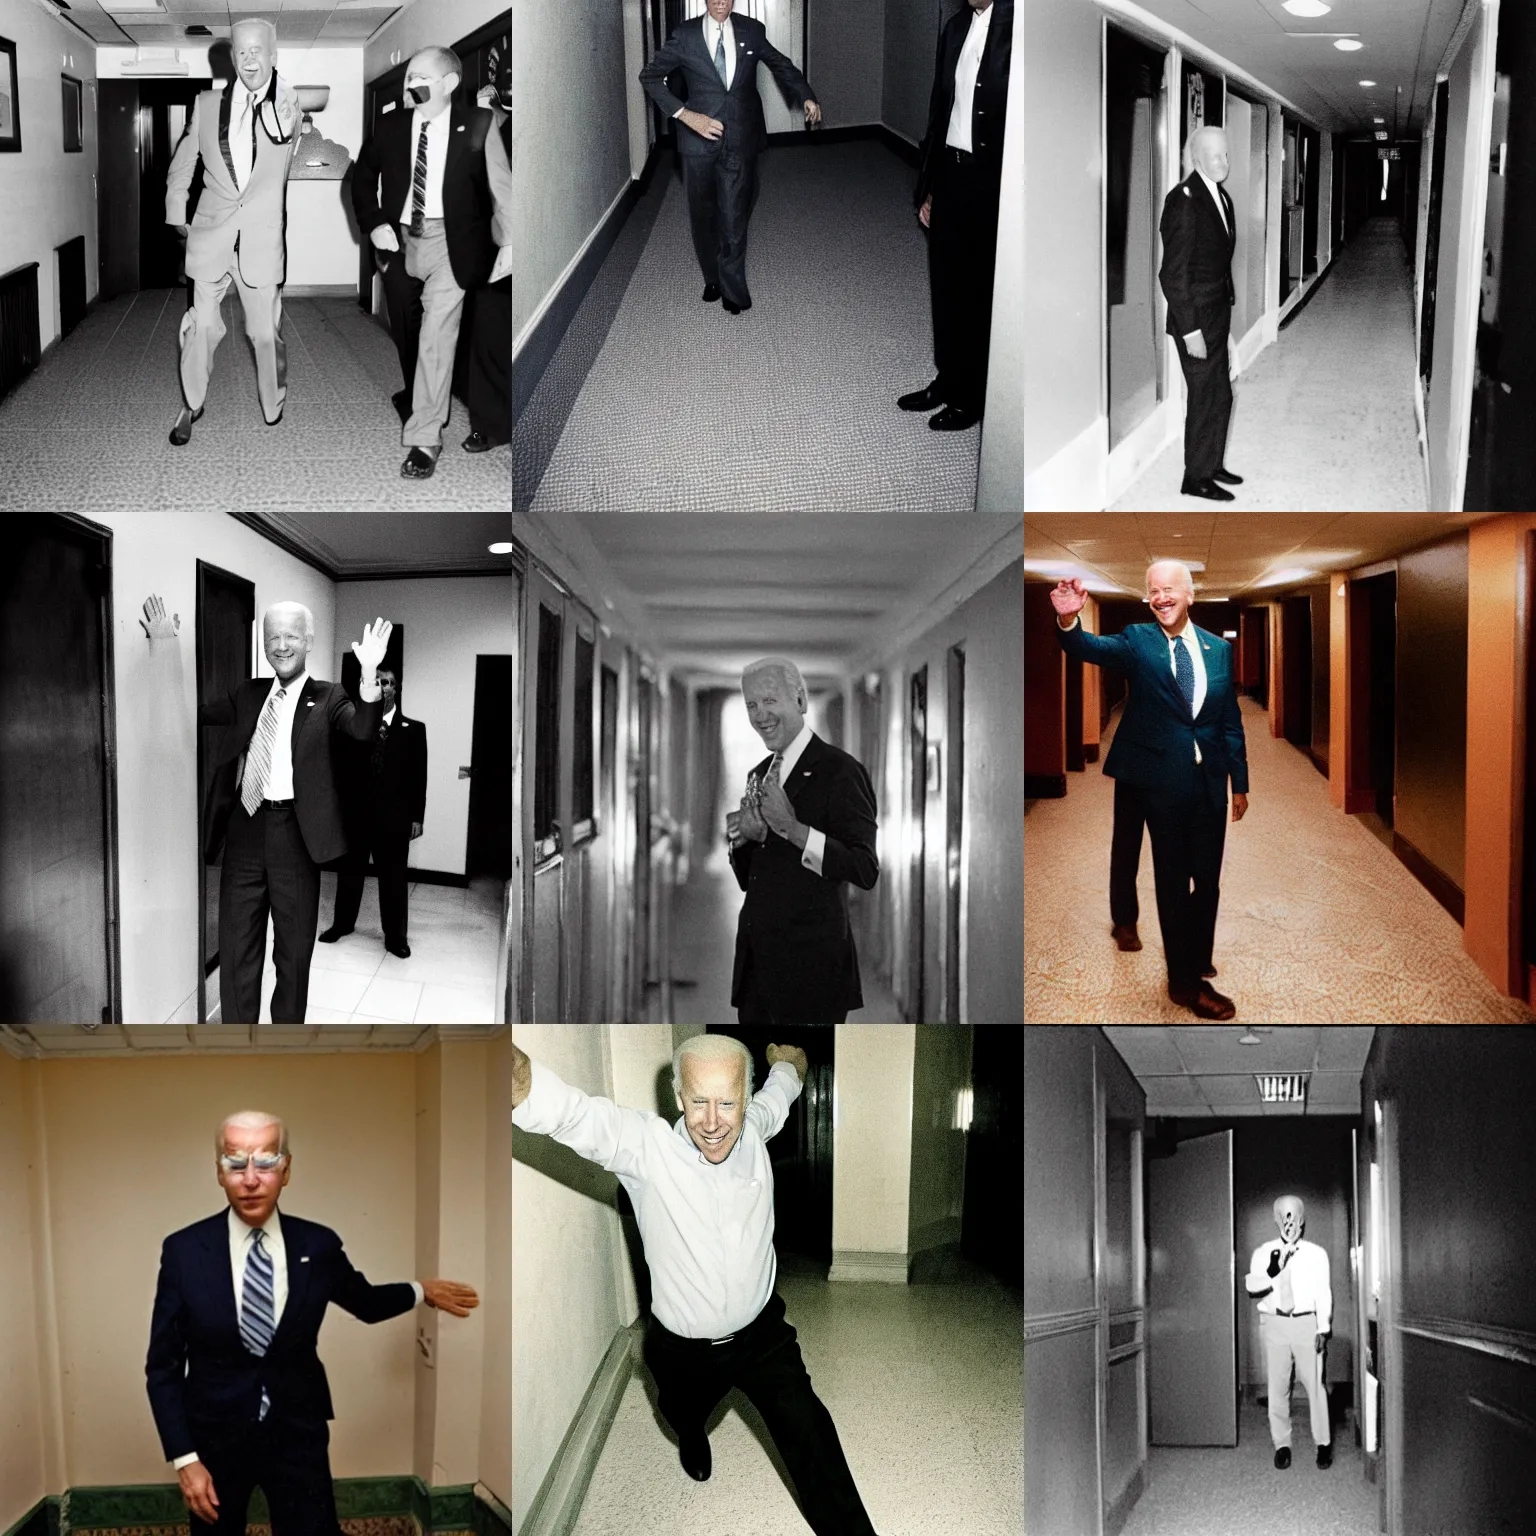 Prompt: joe biden does a t - pose at the end of a moldy hotel hallway, cursed image, 3 5 mm film, dark aura